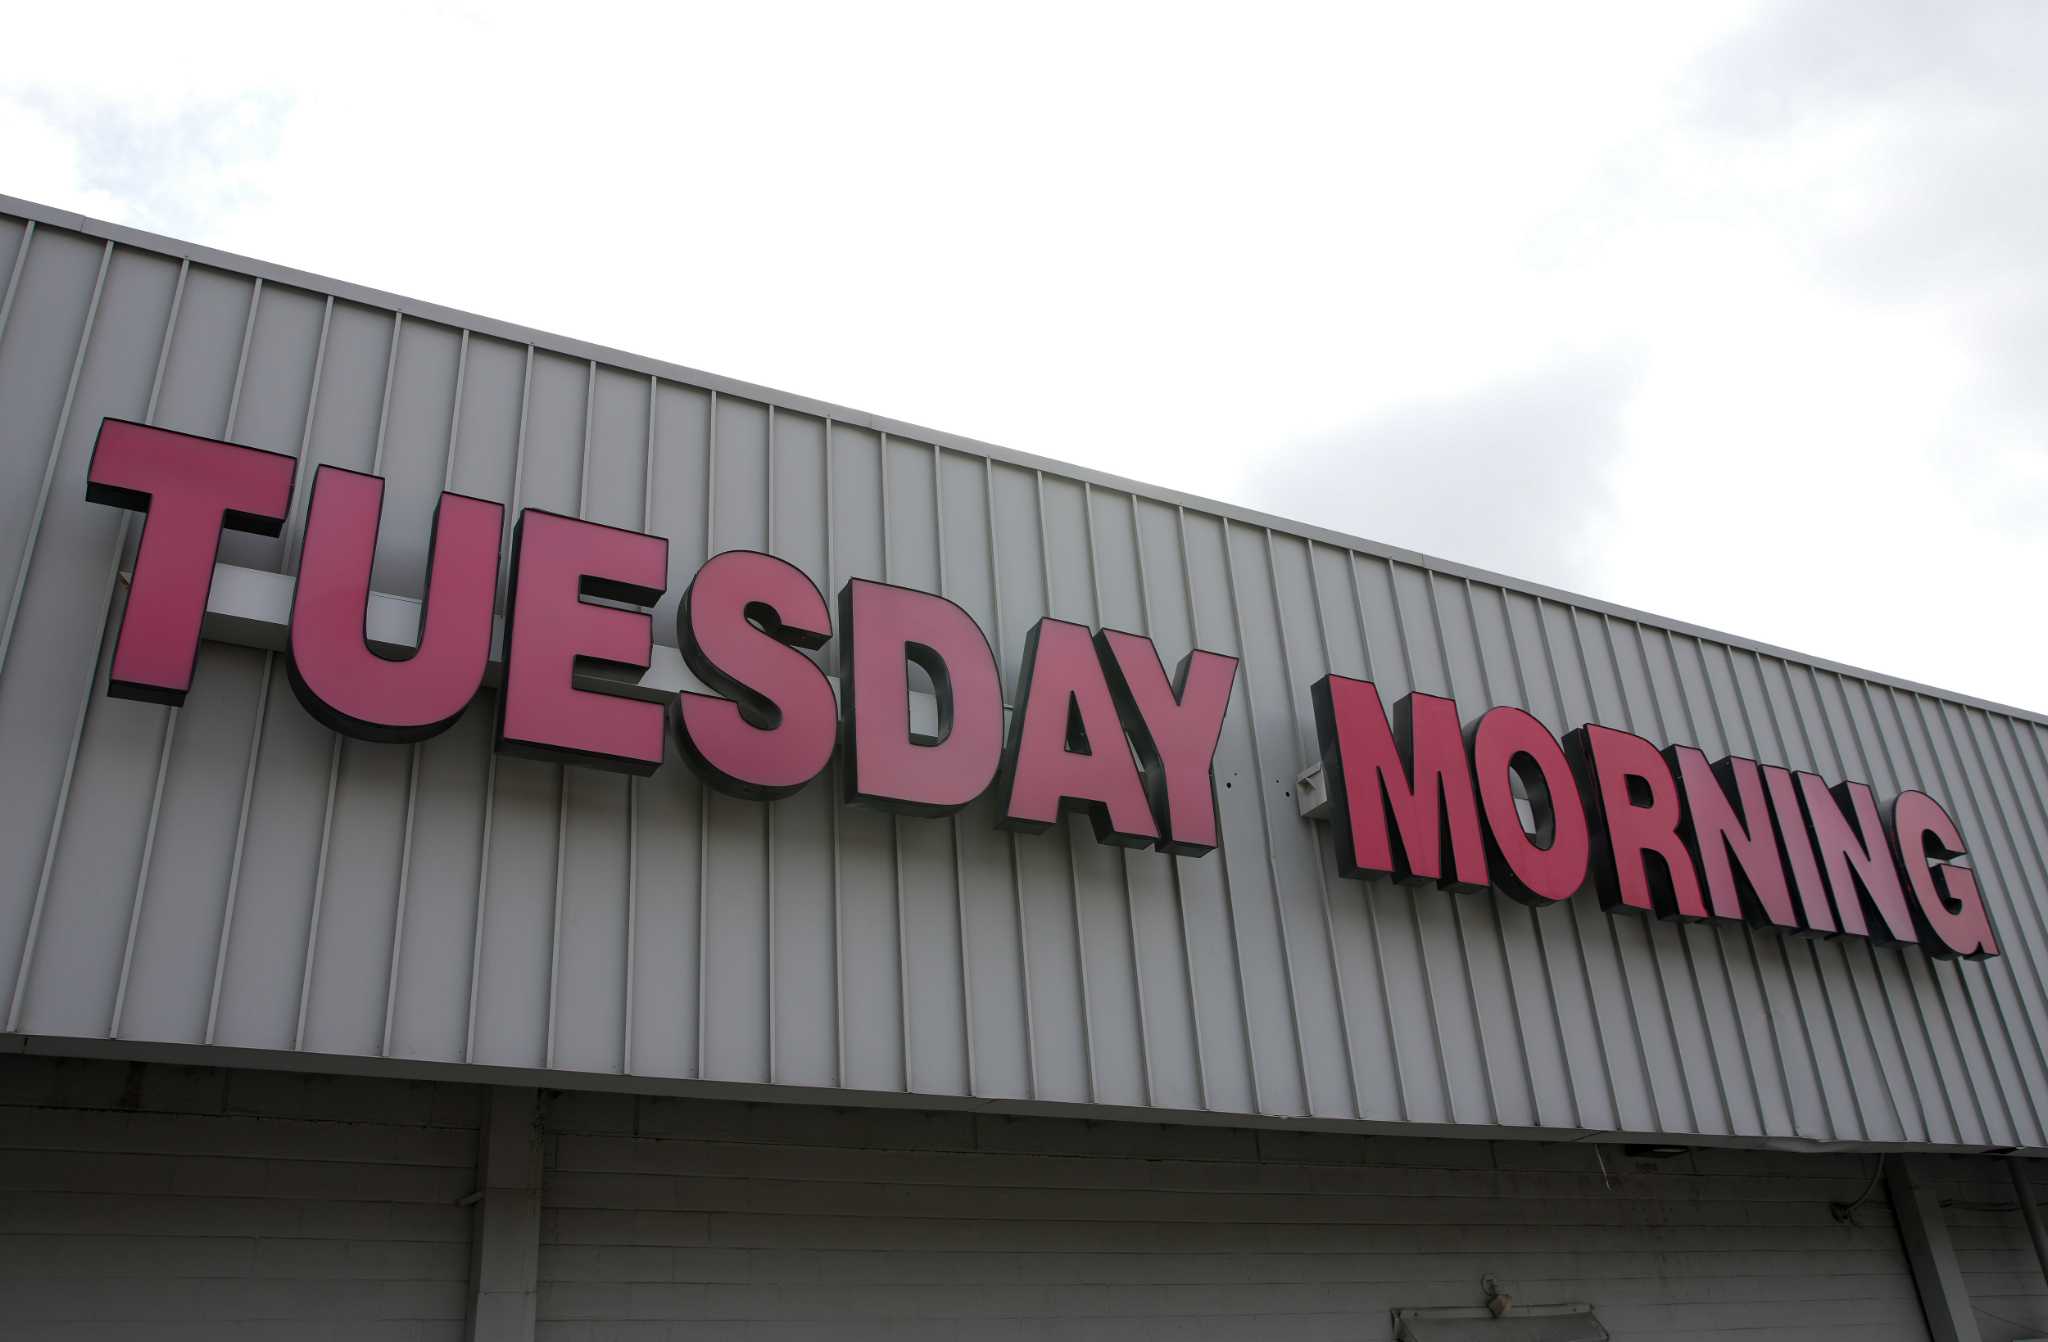 Tuesday Morning closing 3 Houston stores due to bankruptcy, holds sale